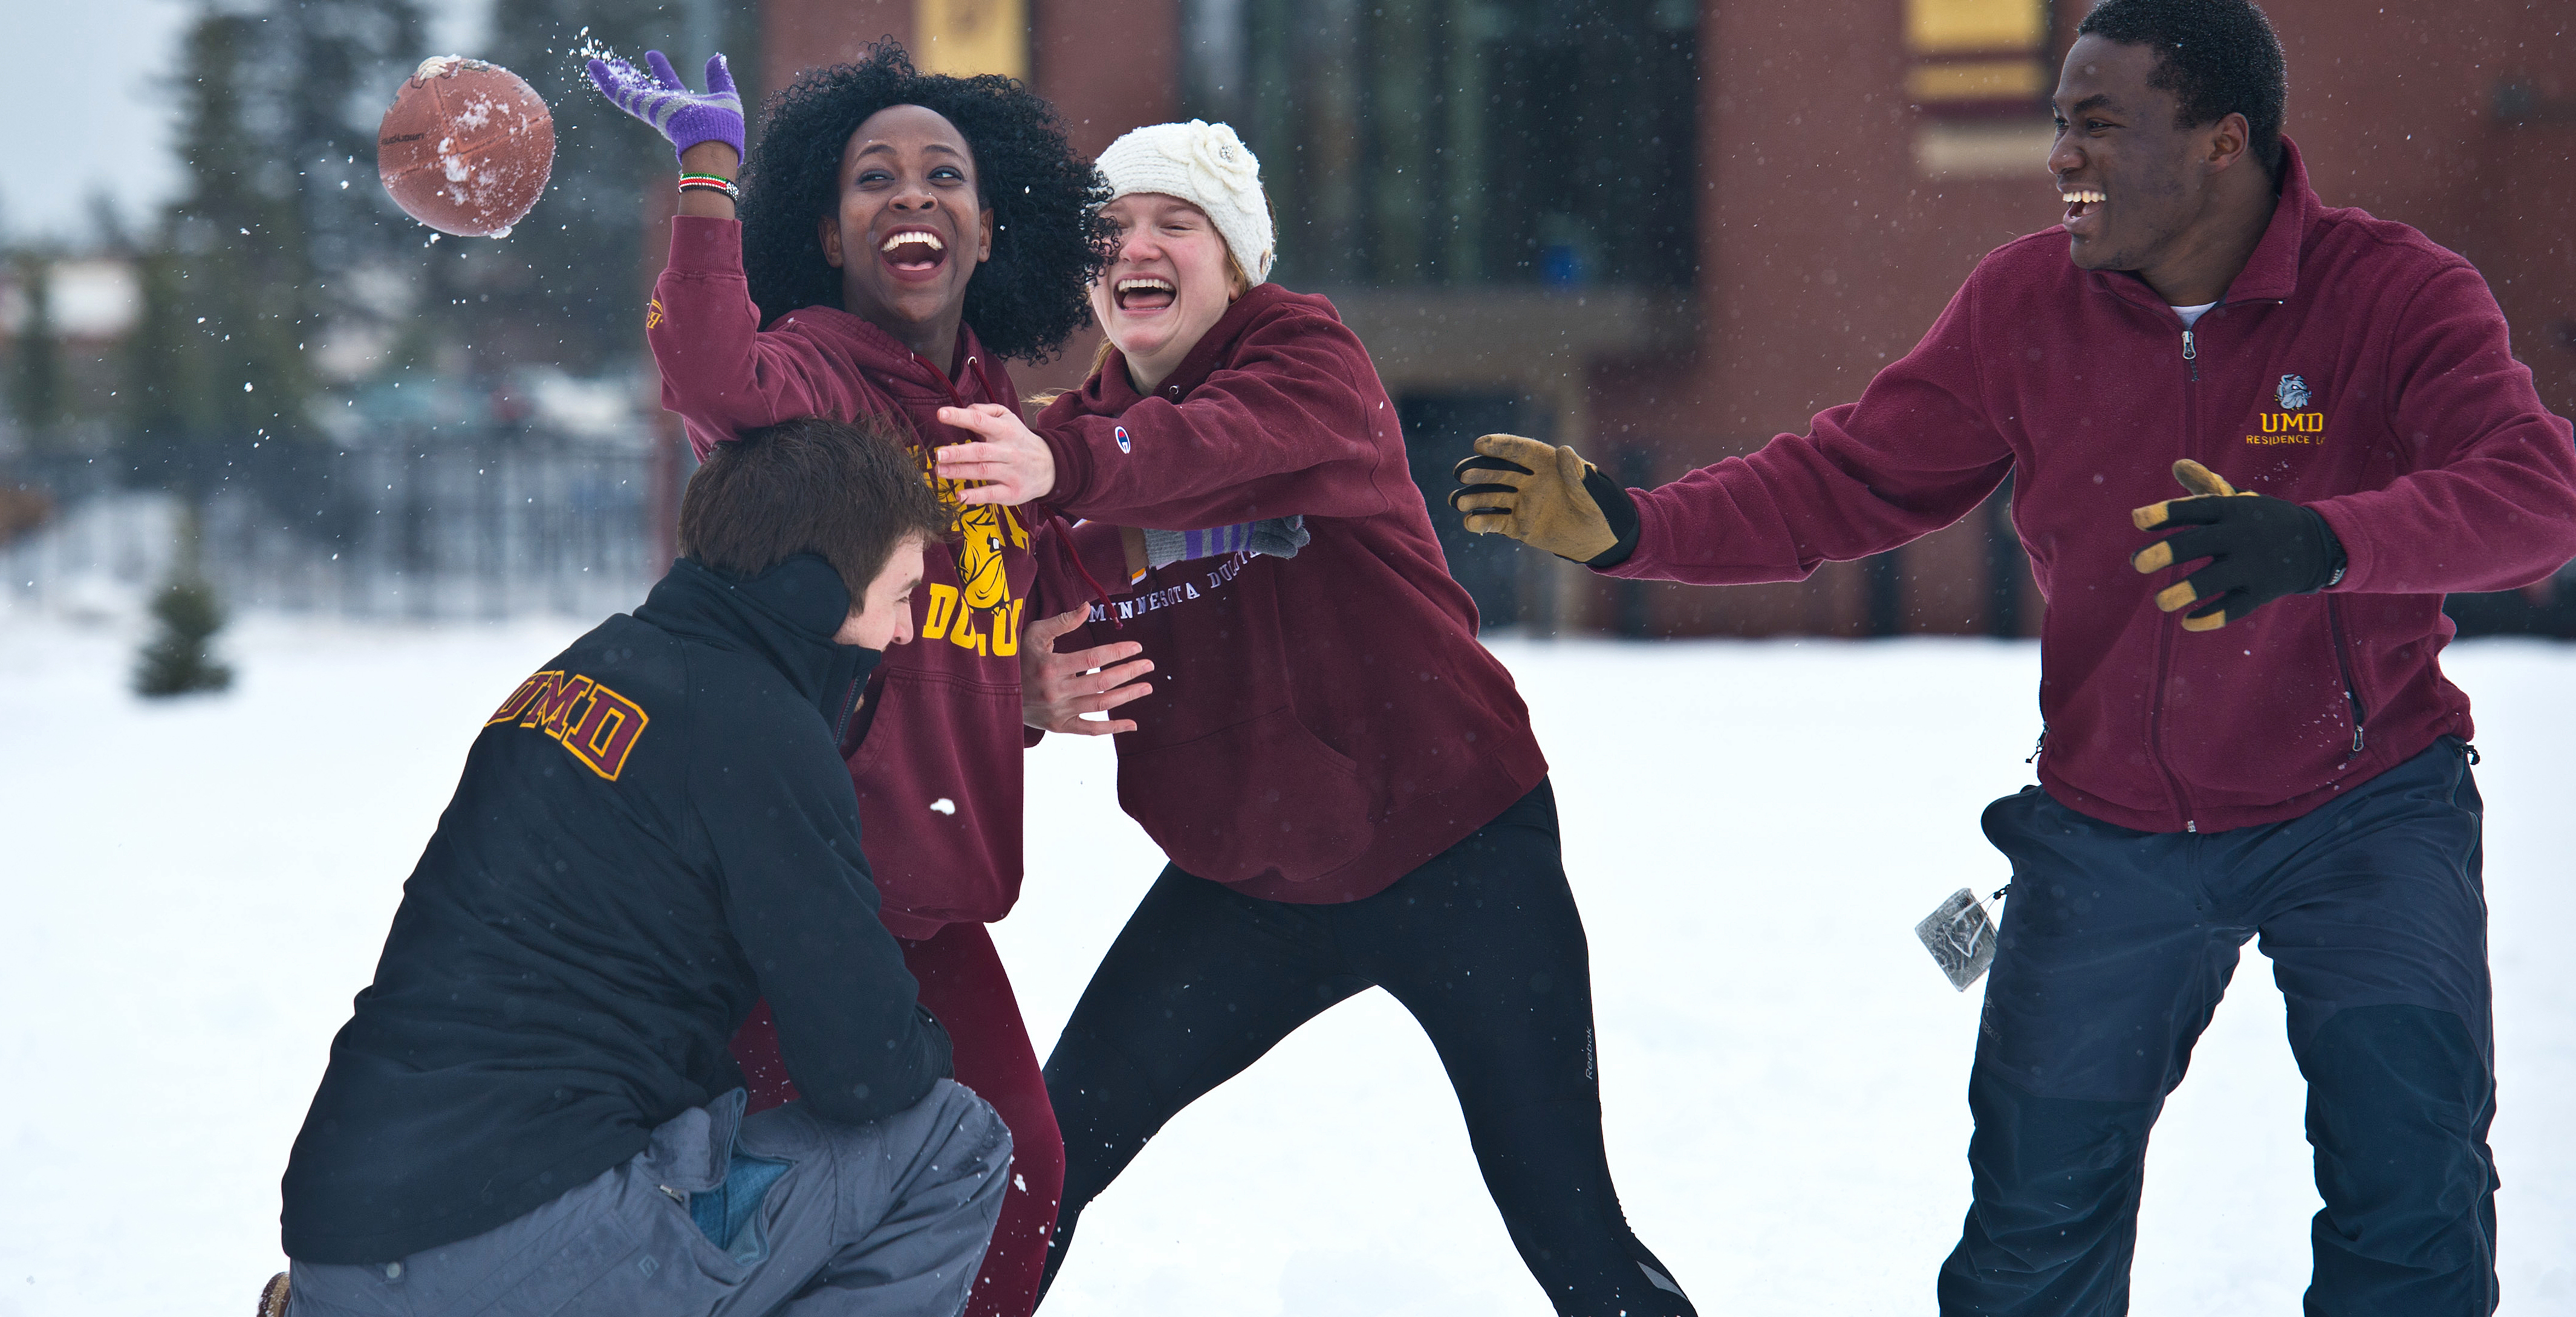 students playing in the snow